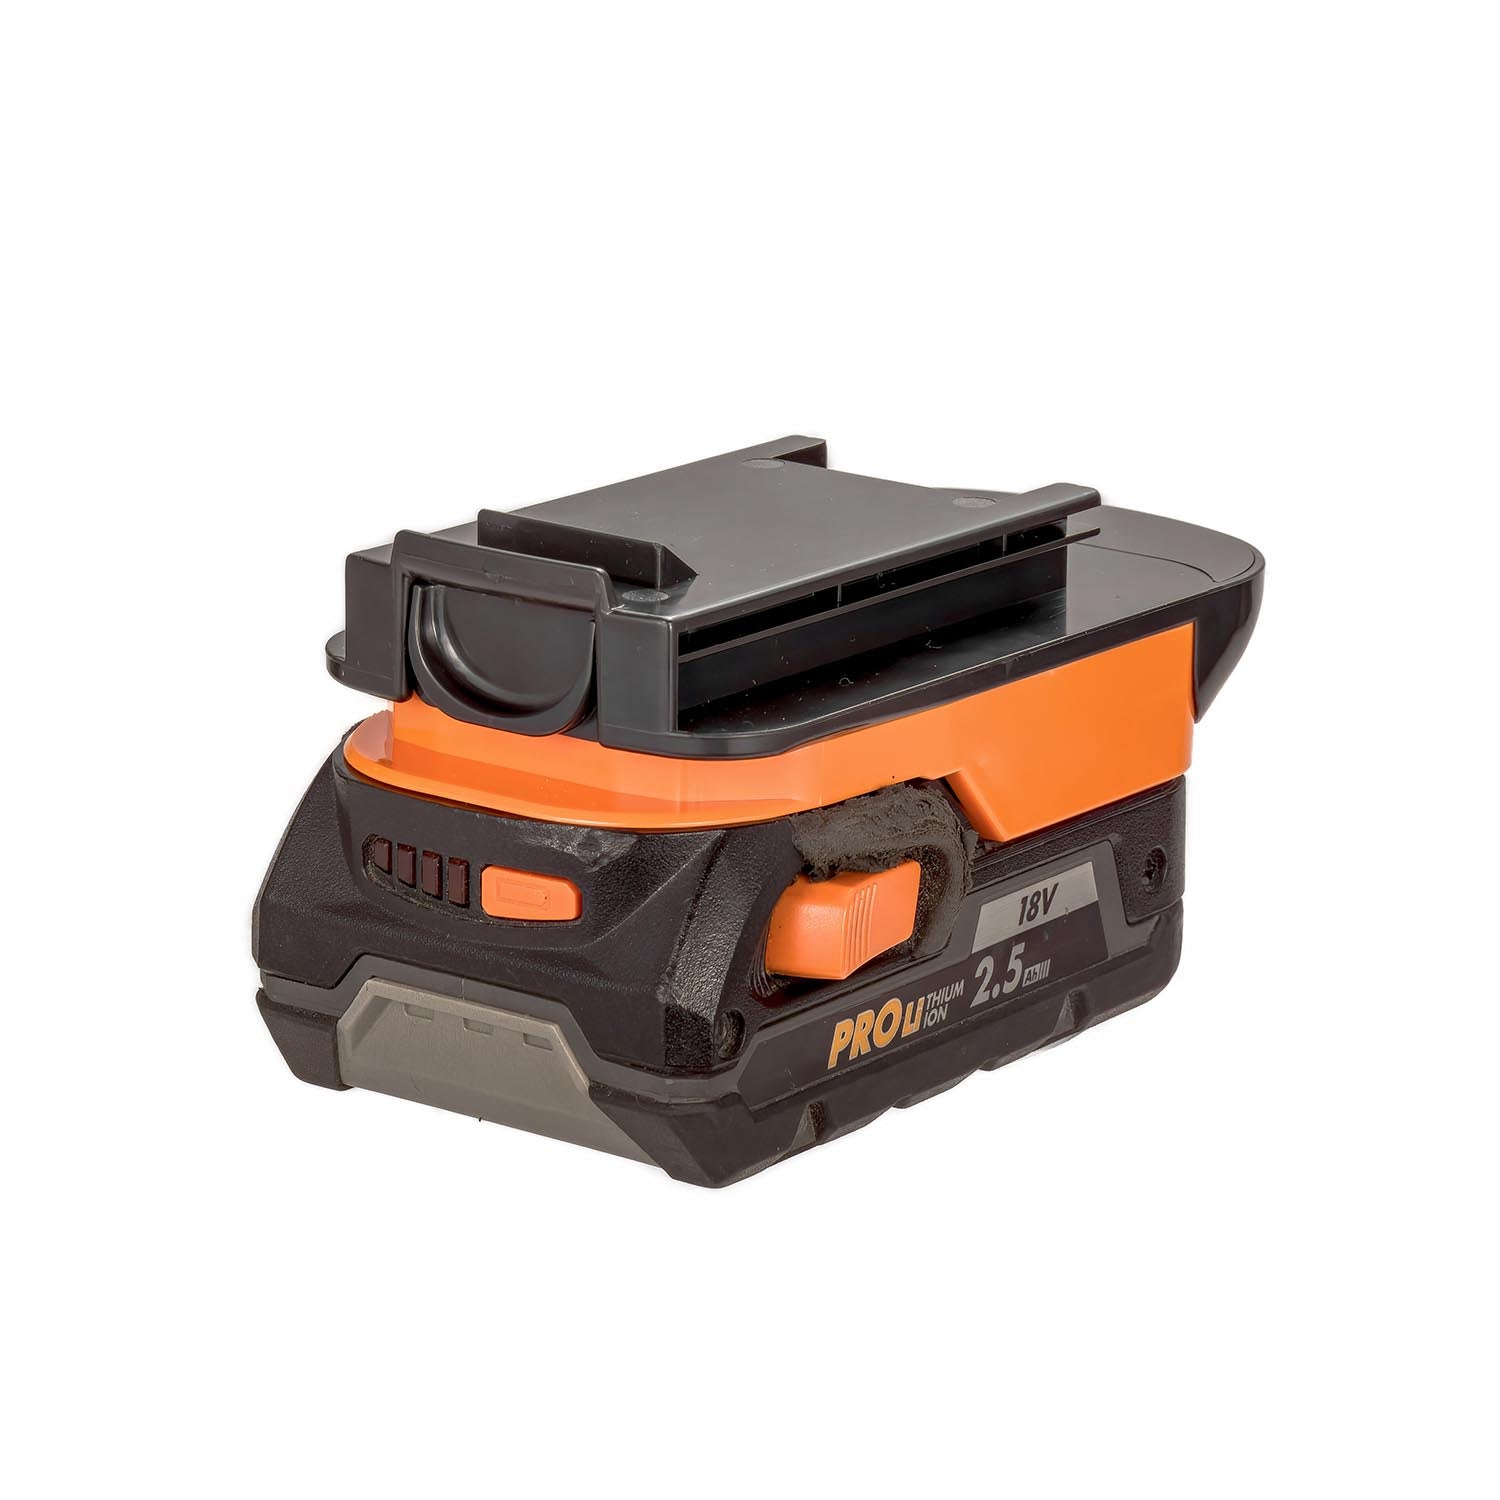 Black and Decker Battery Adapter to RIDGID – Power Tools Adapters